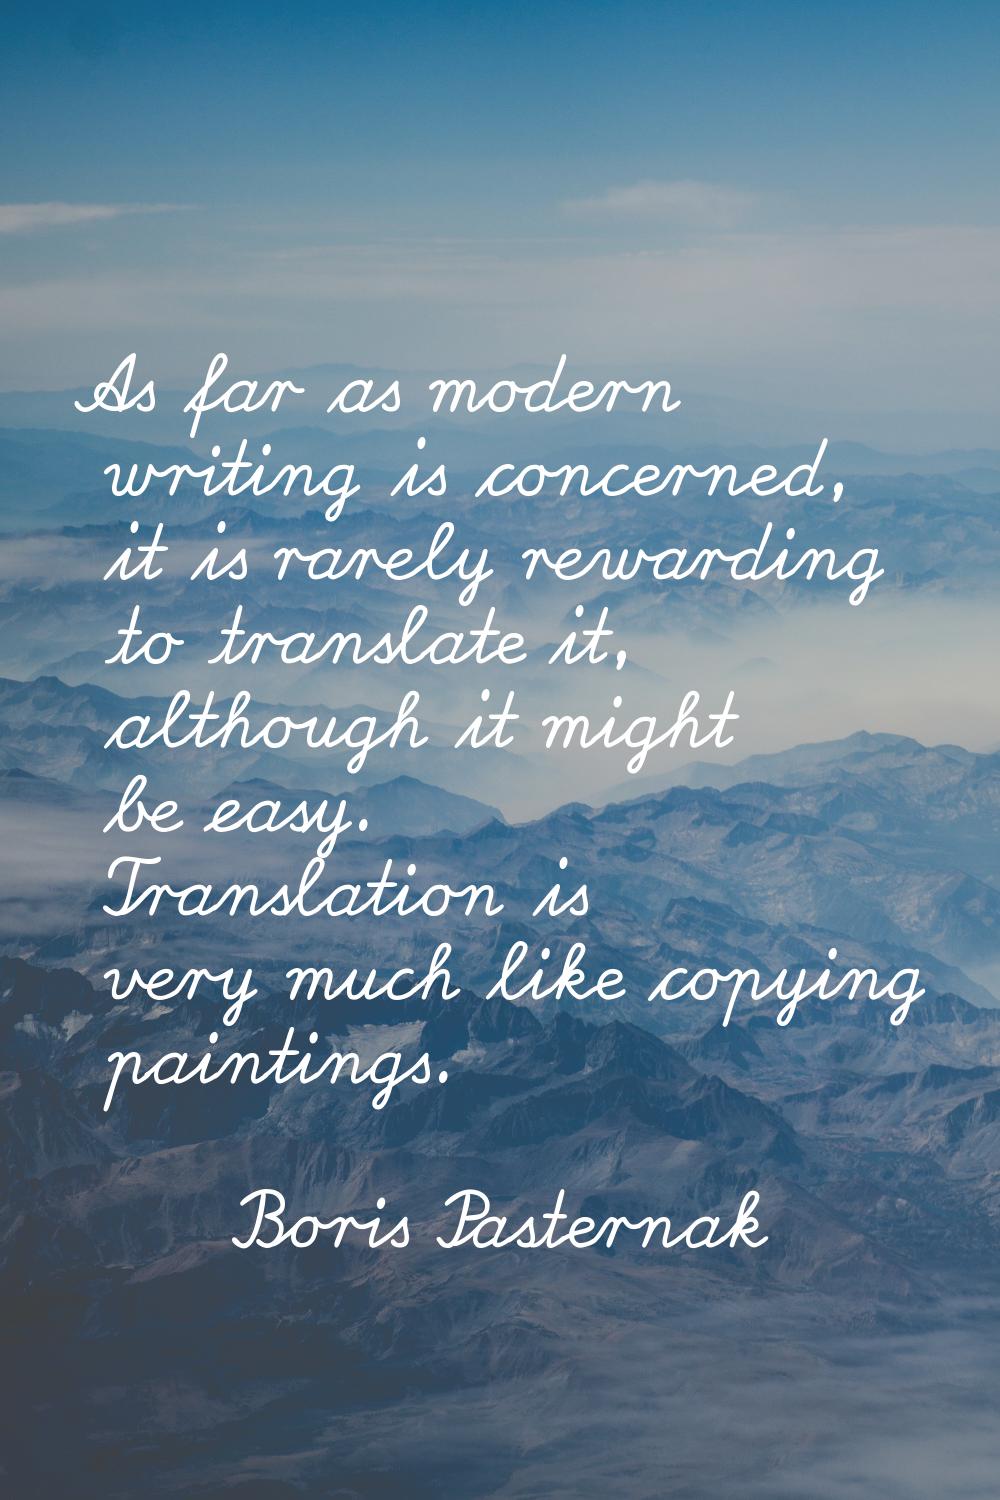 As far as modern writing is concerned, it is rarely rewarding to translate it, although it might be